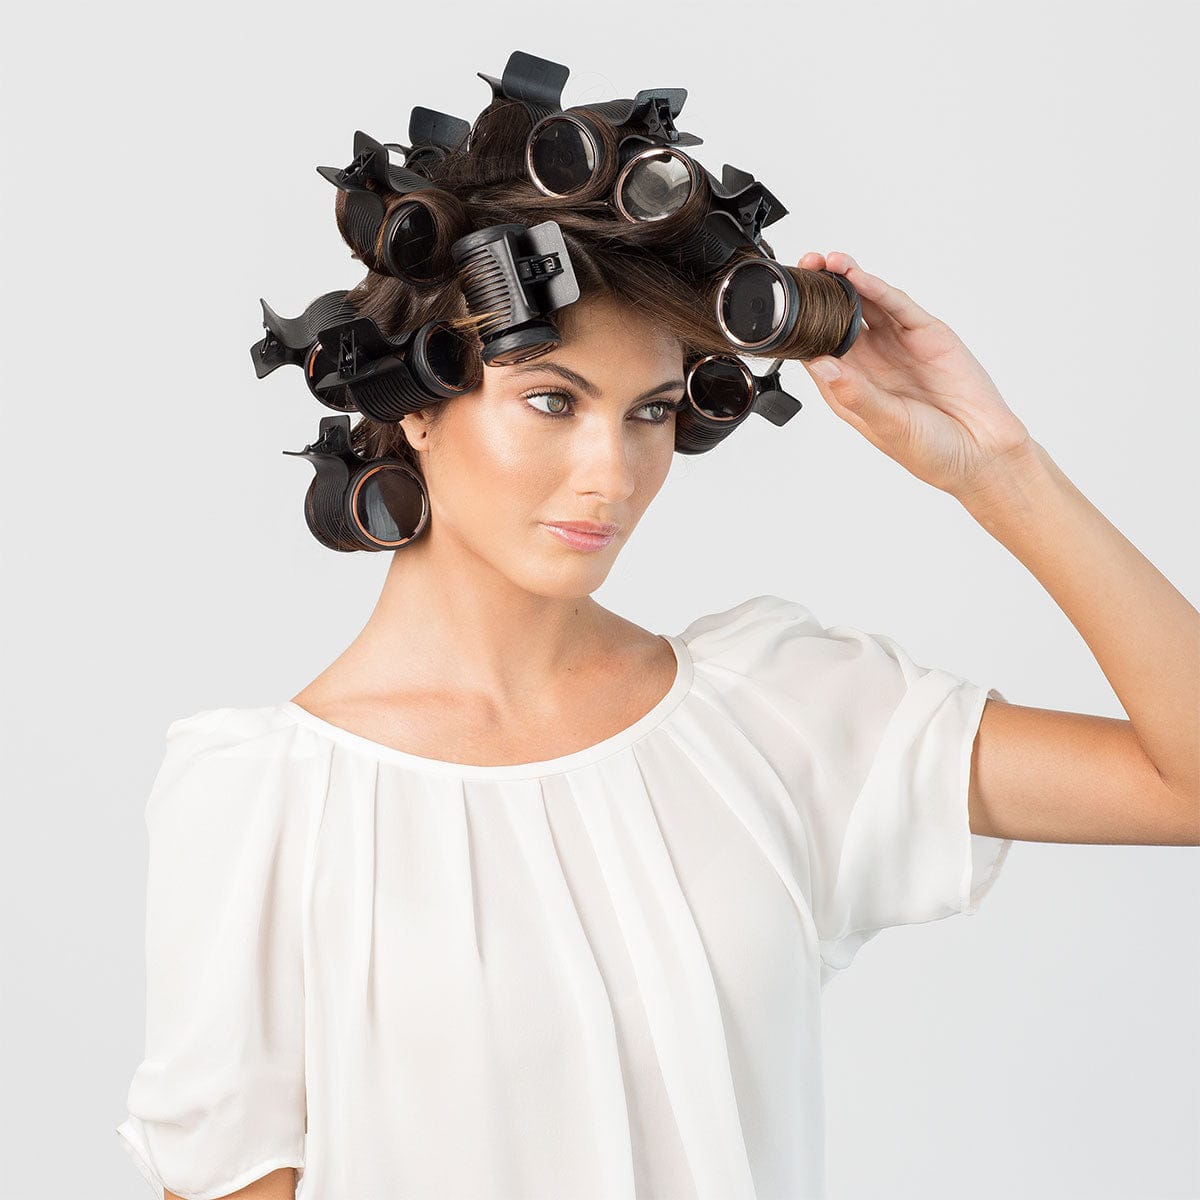 Hair Rollers Tips and Tricks